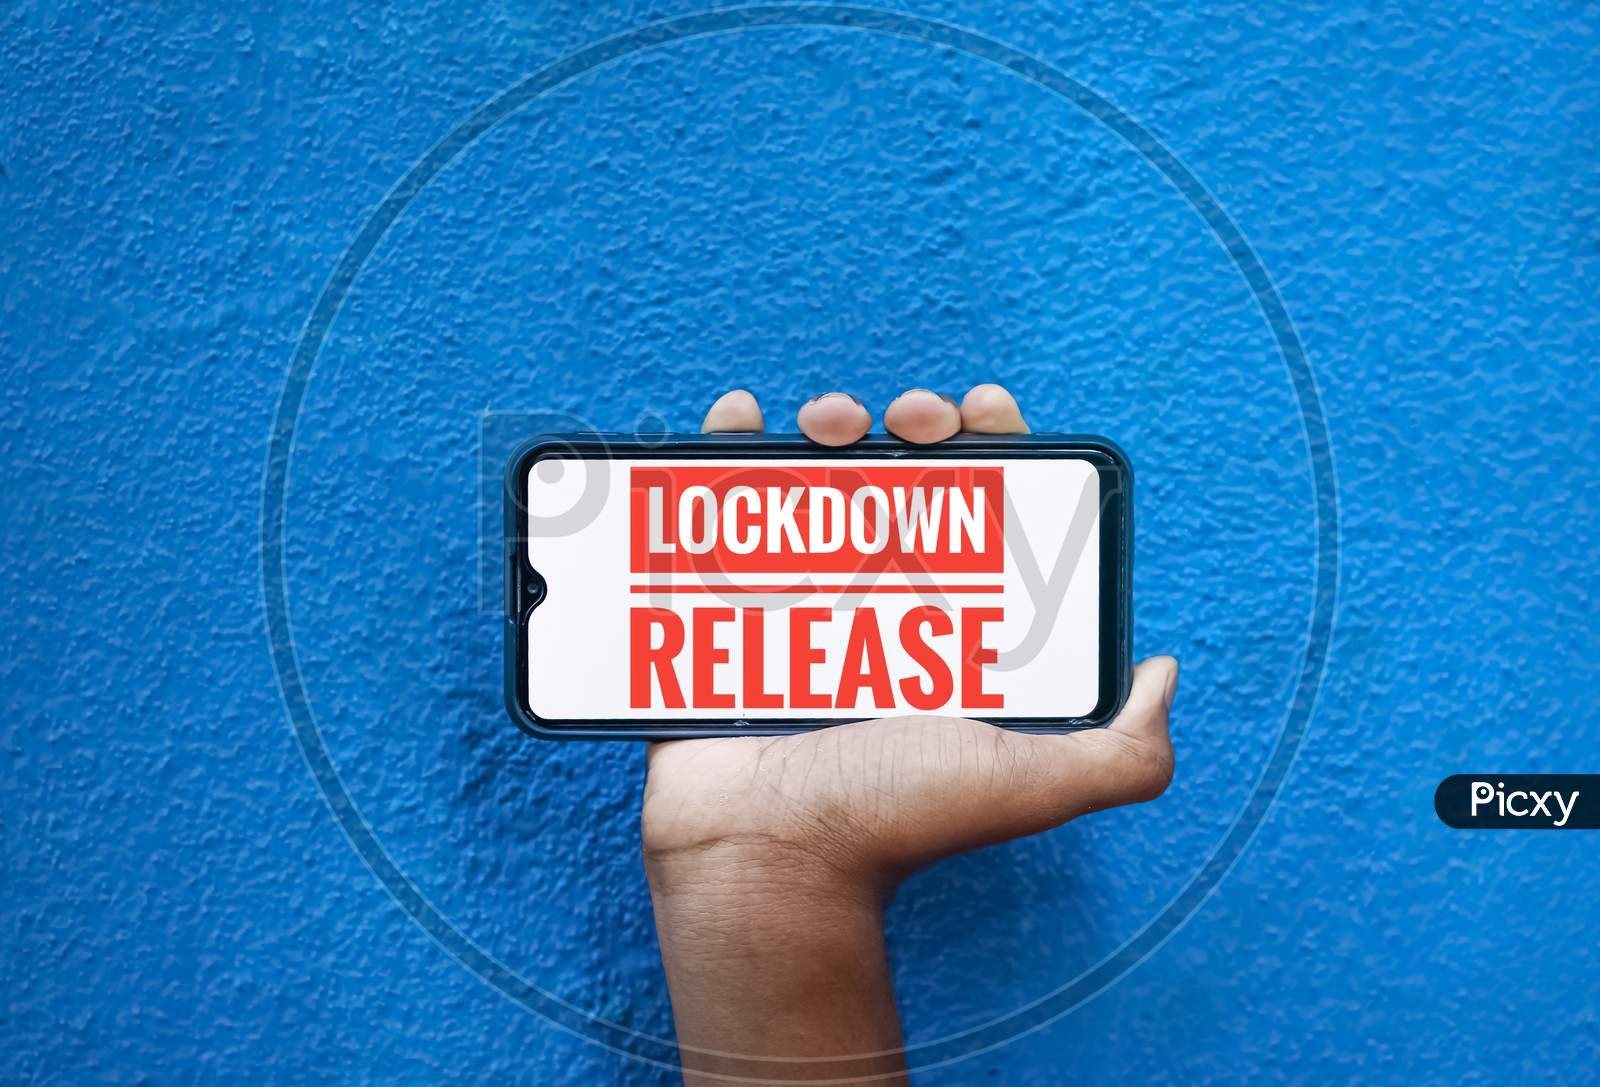 Lock Down Release Wording On Smart Phone Screen Isolated On Blue Background With Copy Space For Text. Person Holding Mobile On His Hand And Showing Front Screen. Lock Down Release For Corona Virus .